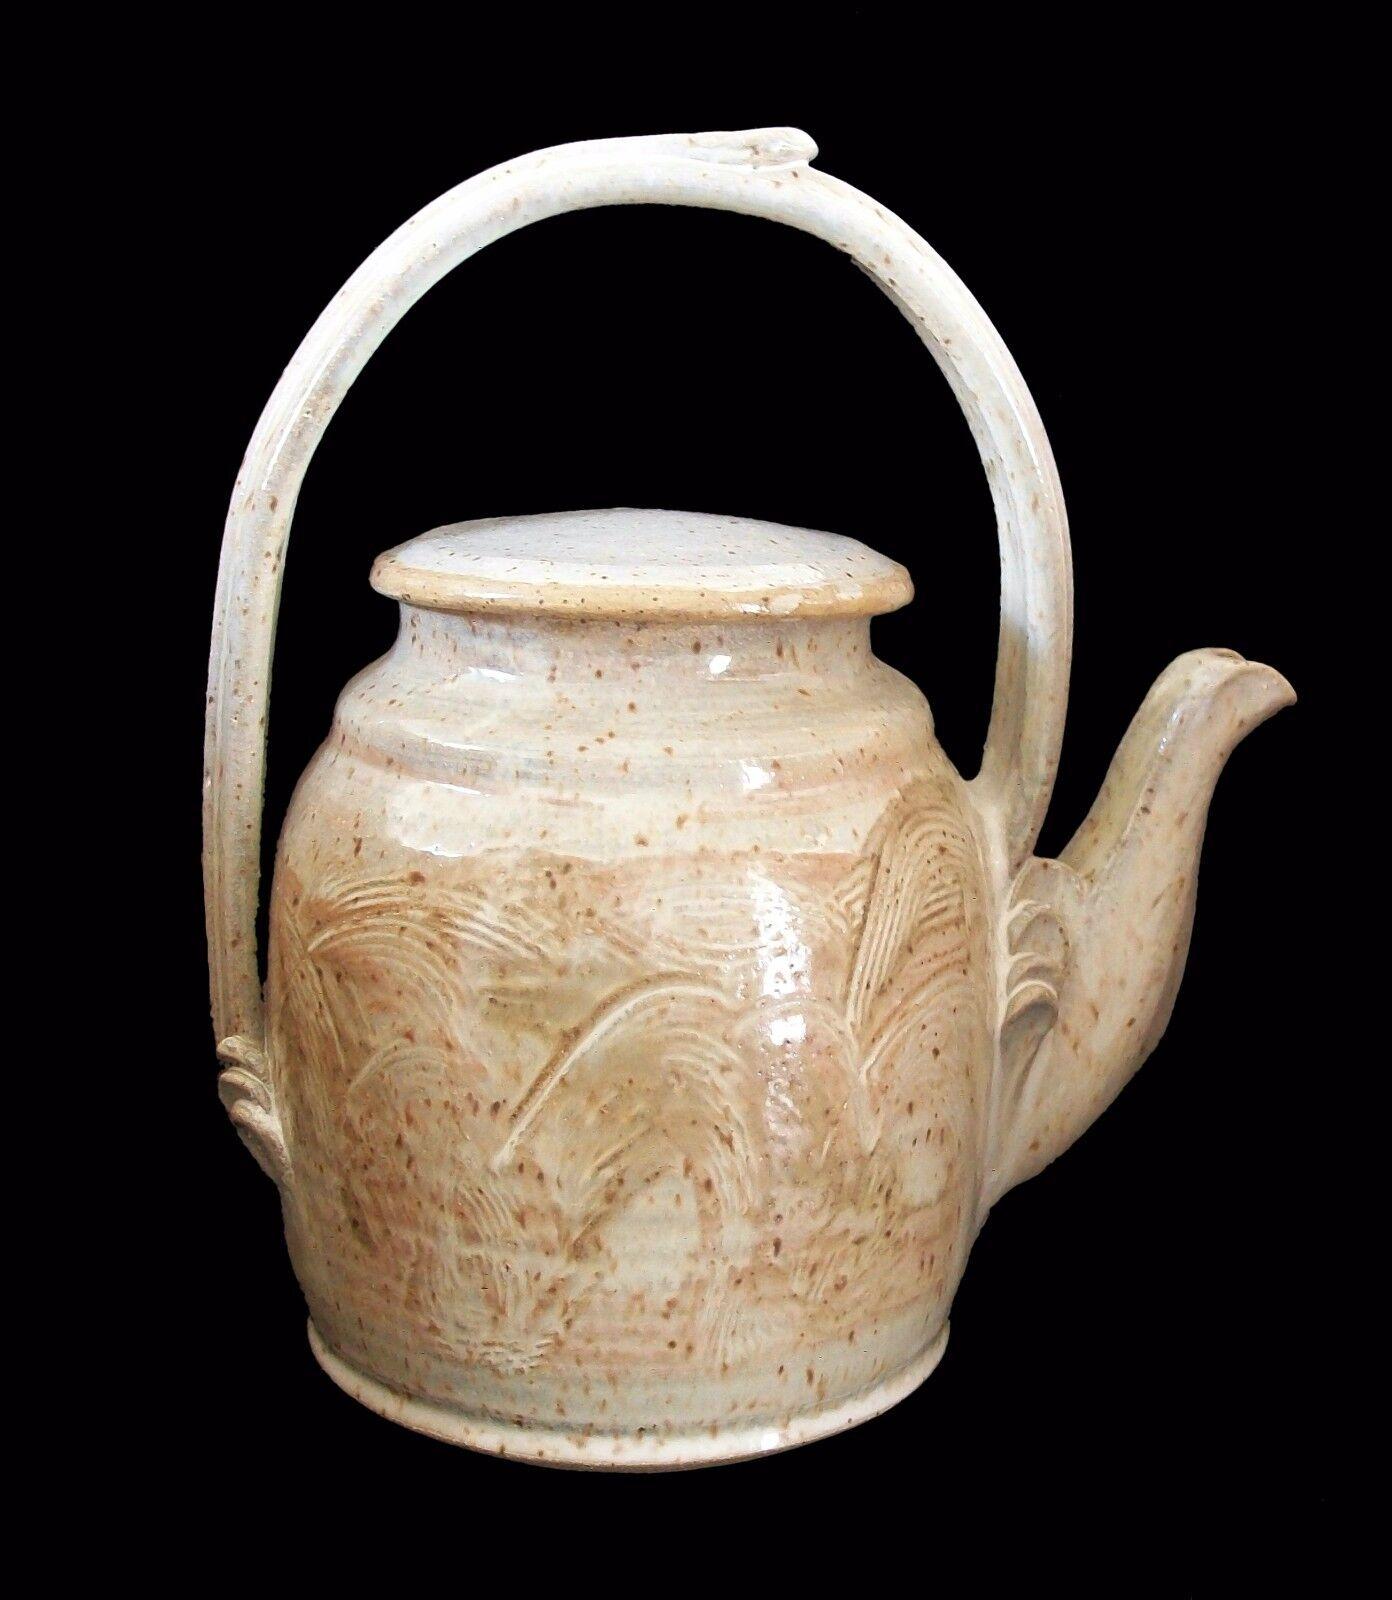 Midcentury stoneware studio pottery teapot - hand carved/scraped decoration to the exterior - gloss cream glaze - dramatic integrated handle - separate lid - indistinctly signed on the base - Canada - circa 1970s.

Excellent vintage condition - no